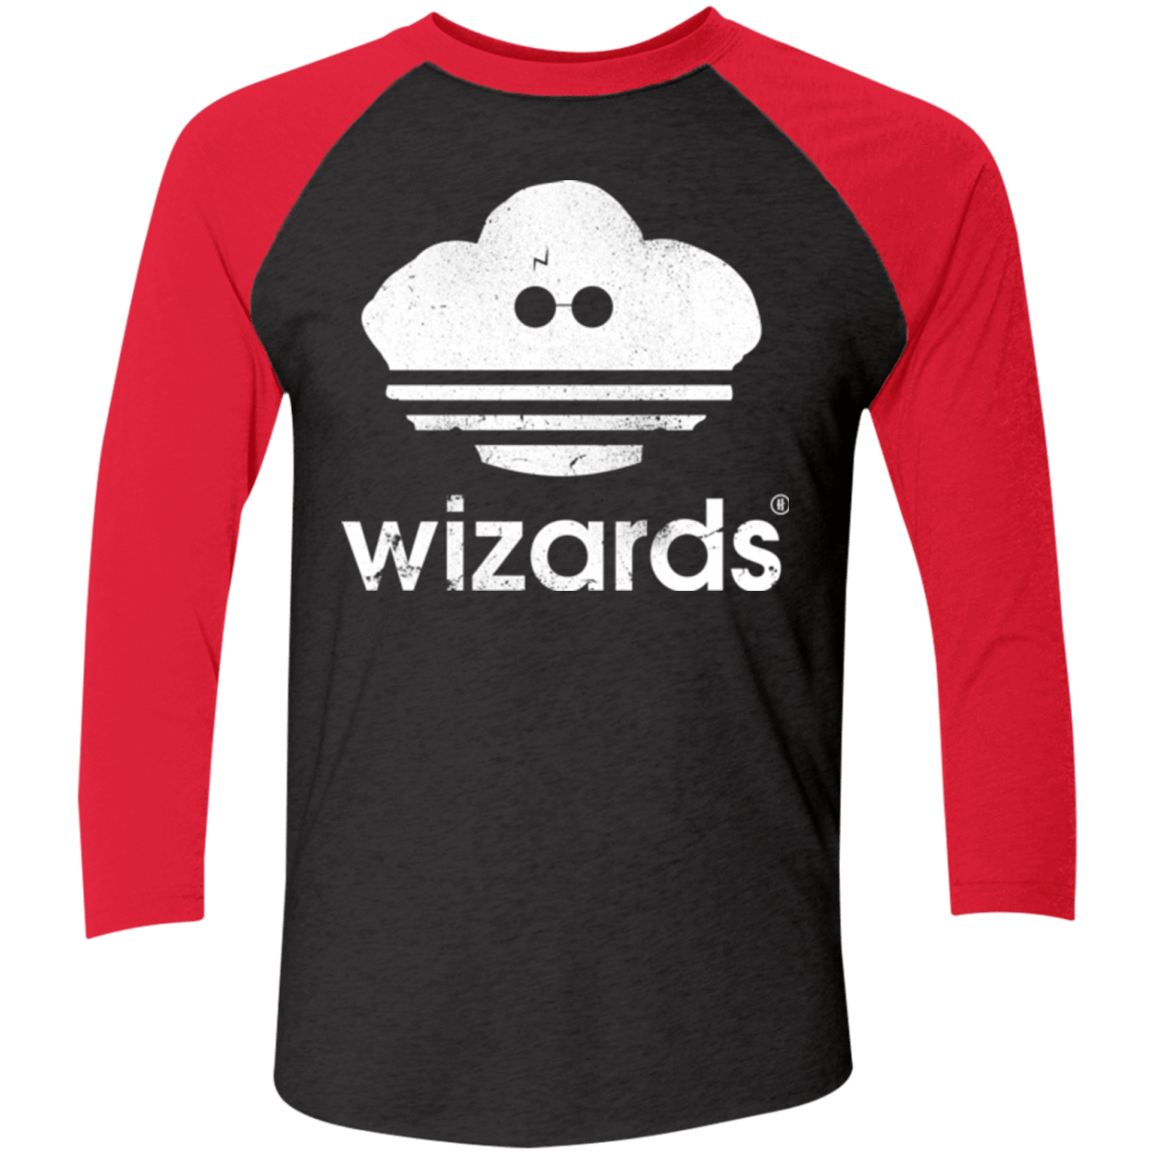 T-Shirts Vintage Black/Vintage Red / X-Small Wizards Men's Triblend 3/4 Sleeve